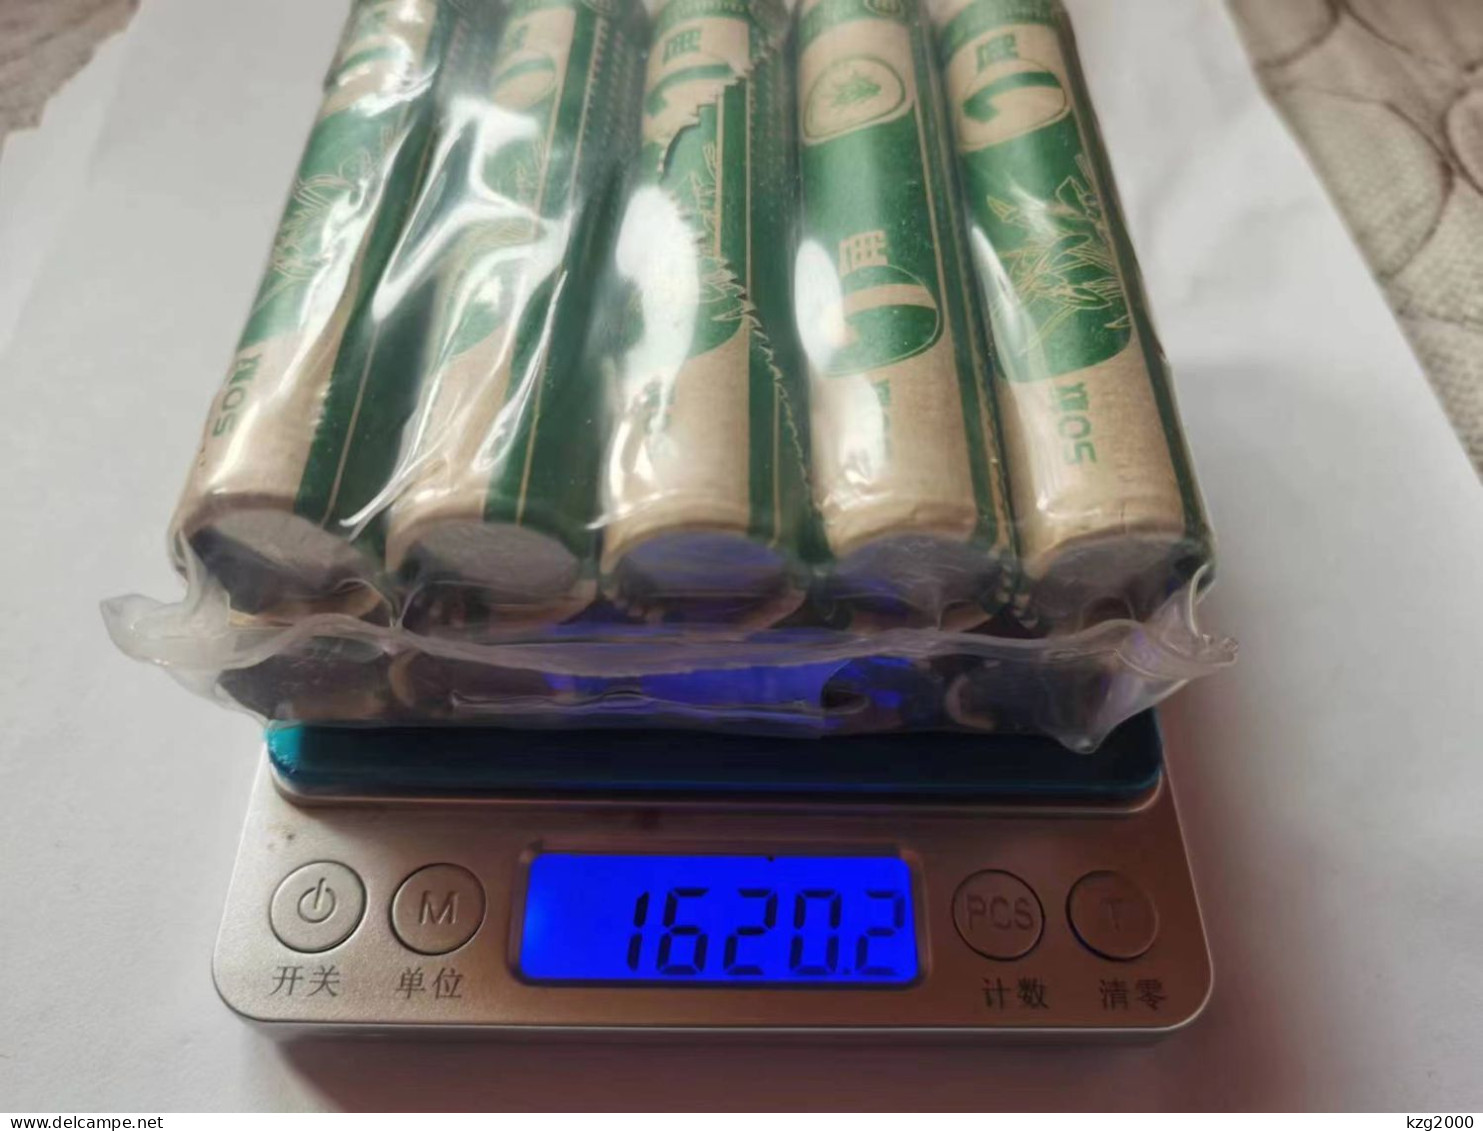 China Coin 2021  RMB 10 Fen  10 Cent  Steel Core Nickel Plating  10 Rolls X 50sets  = 500 Sets  500 Coins  500Pcs  1.6KG - Chine